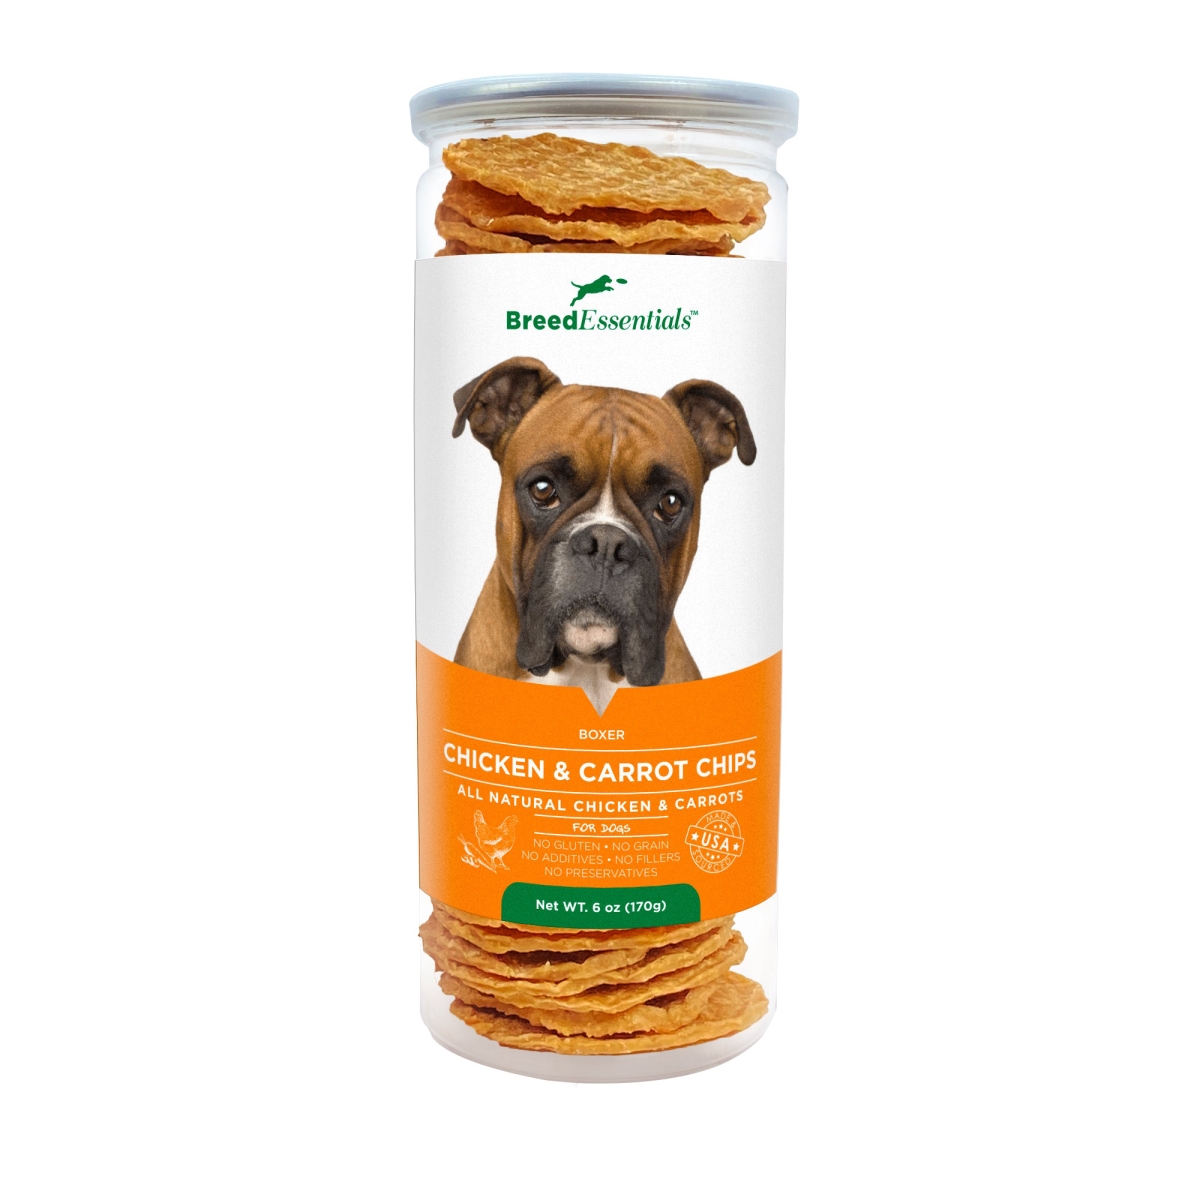 Picture of Breed Essentials 197247000334 6 oz Chicken & Carrot Chips - Boxer